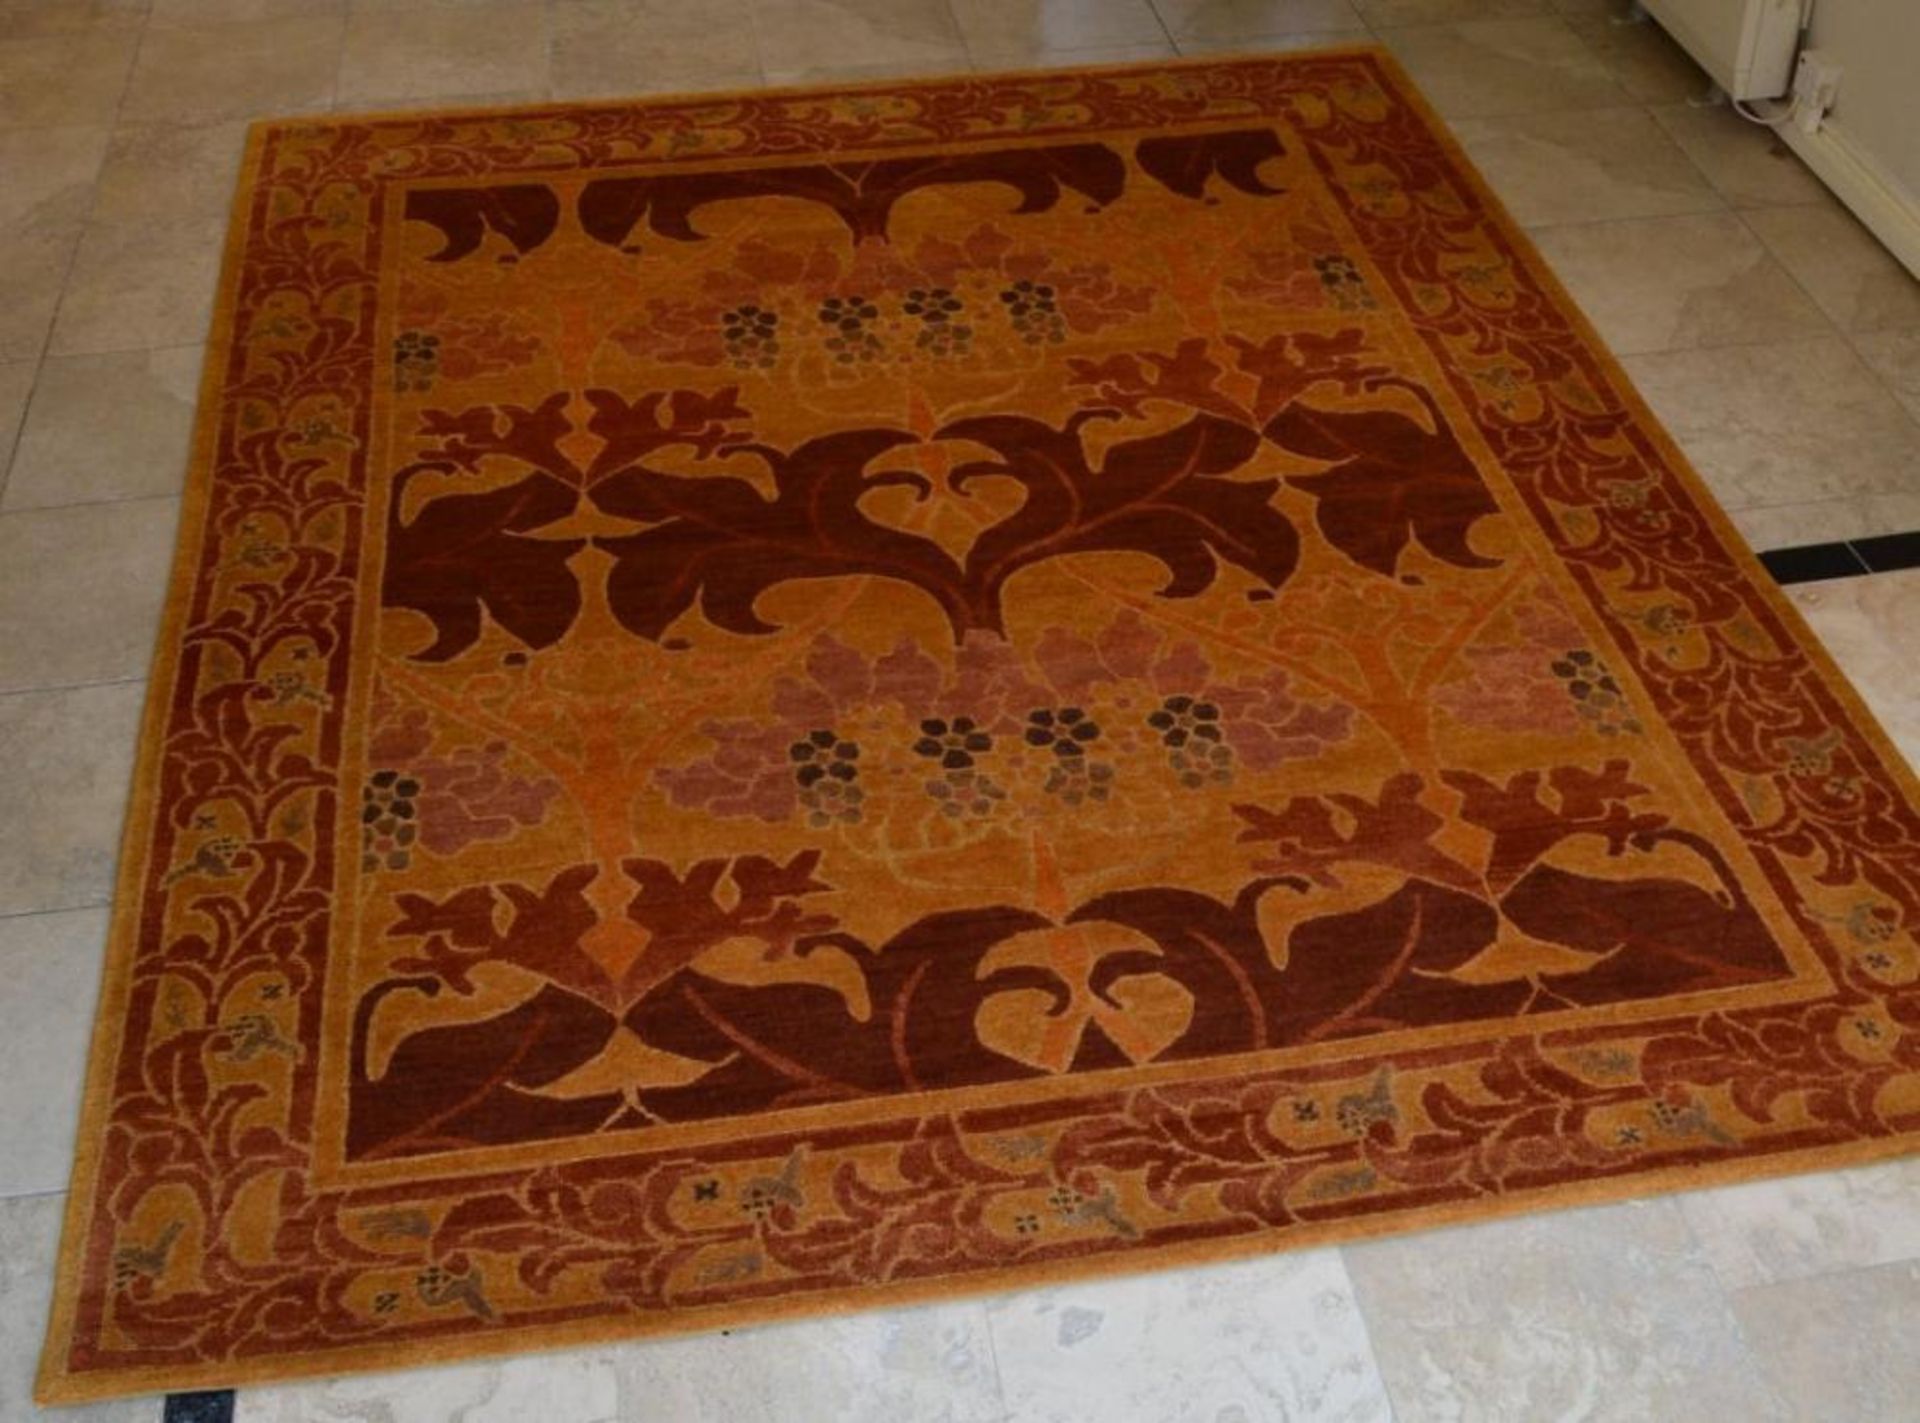 1 x Nepalese Terracotta Arts & Crafts Design Hand Knotted Rug - 100% Handspun Wool - Dimensions: - Image 18 of 18